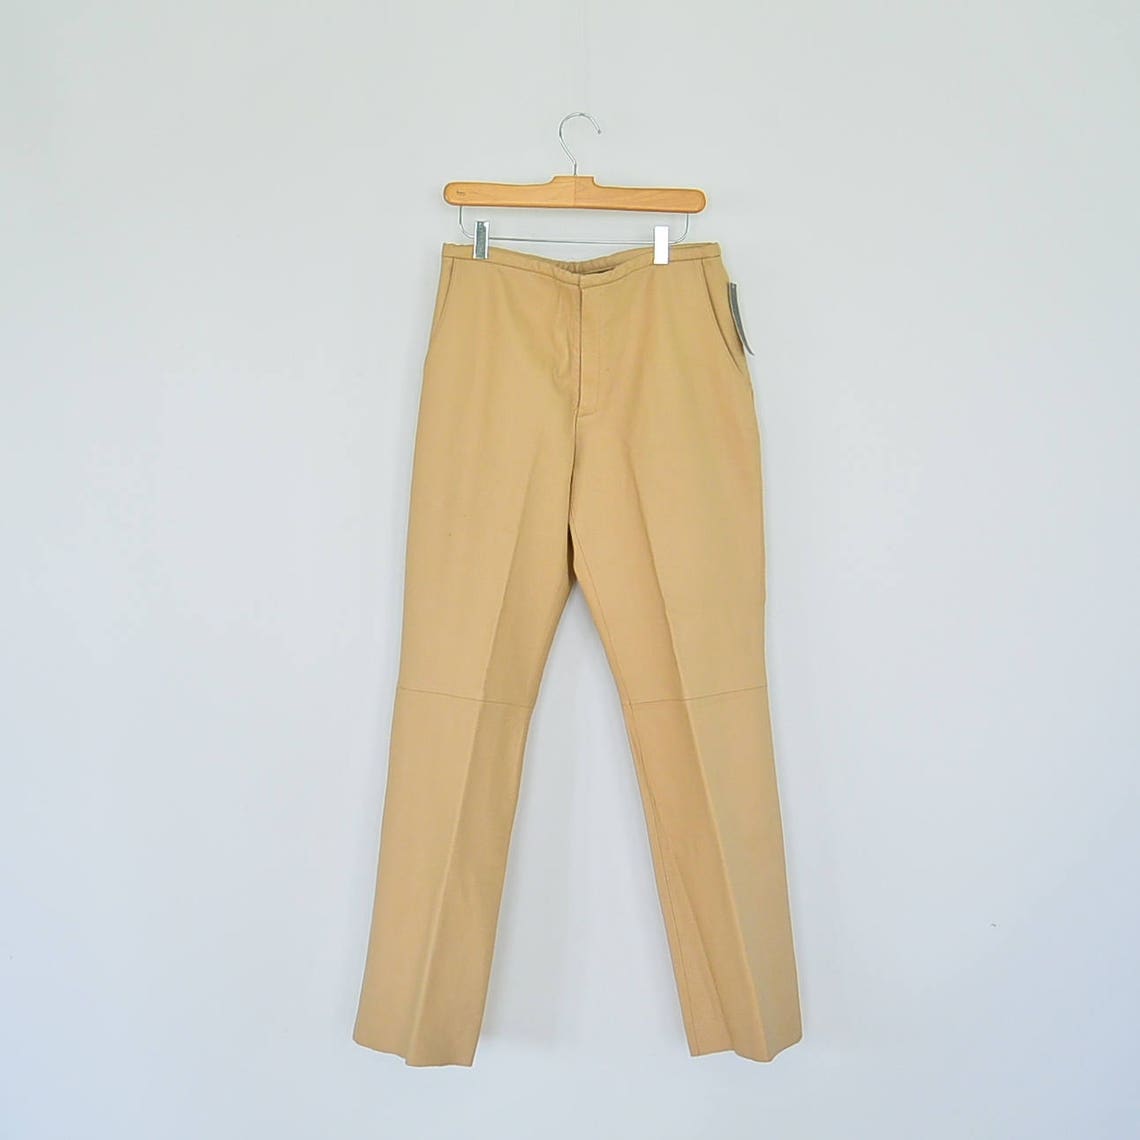 Beige Leather Pants Nylon Lined Vintage 90's New With Tags - Etsy